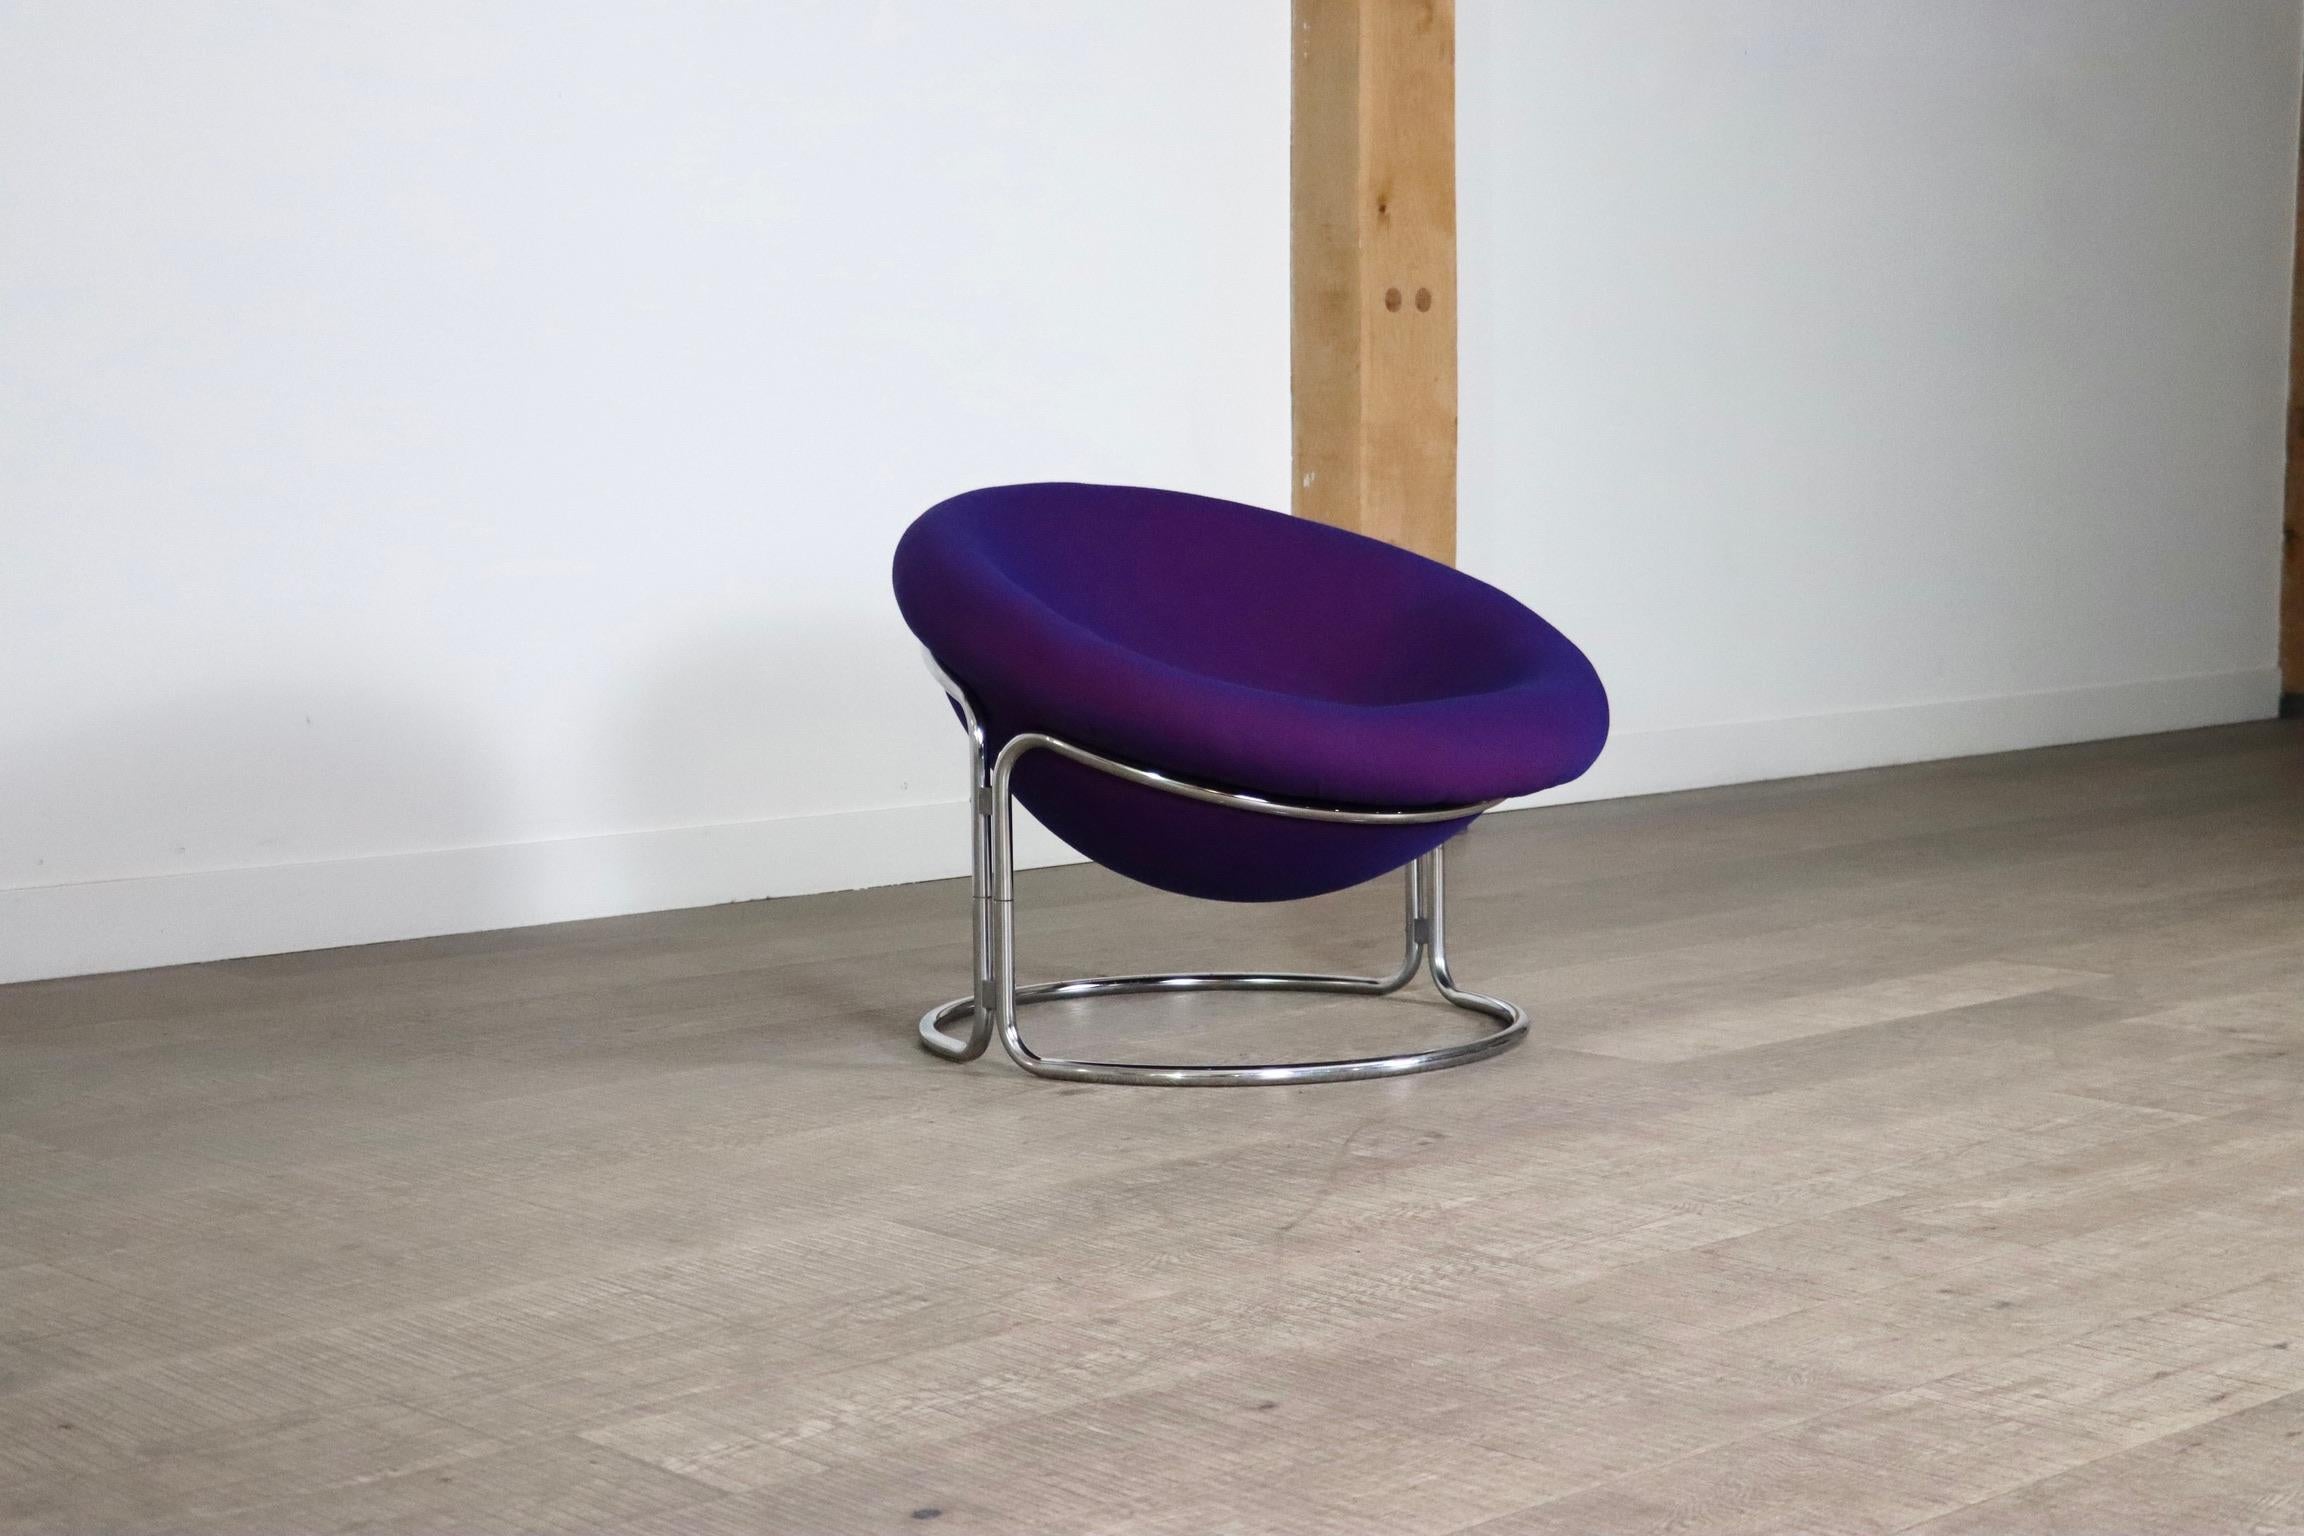 Mid-20th Century Luigi Colani Lounge Chair For Kusch & Co Germany 1968 For Sale